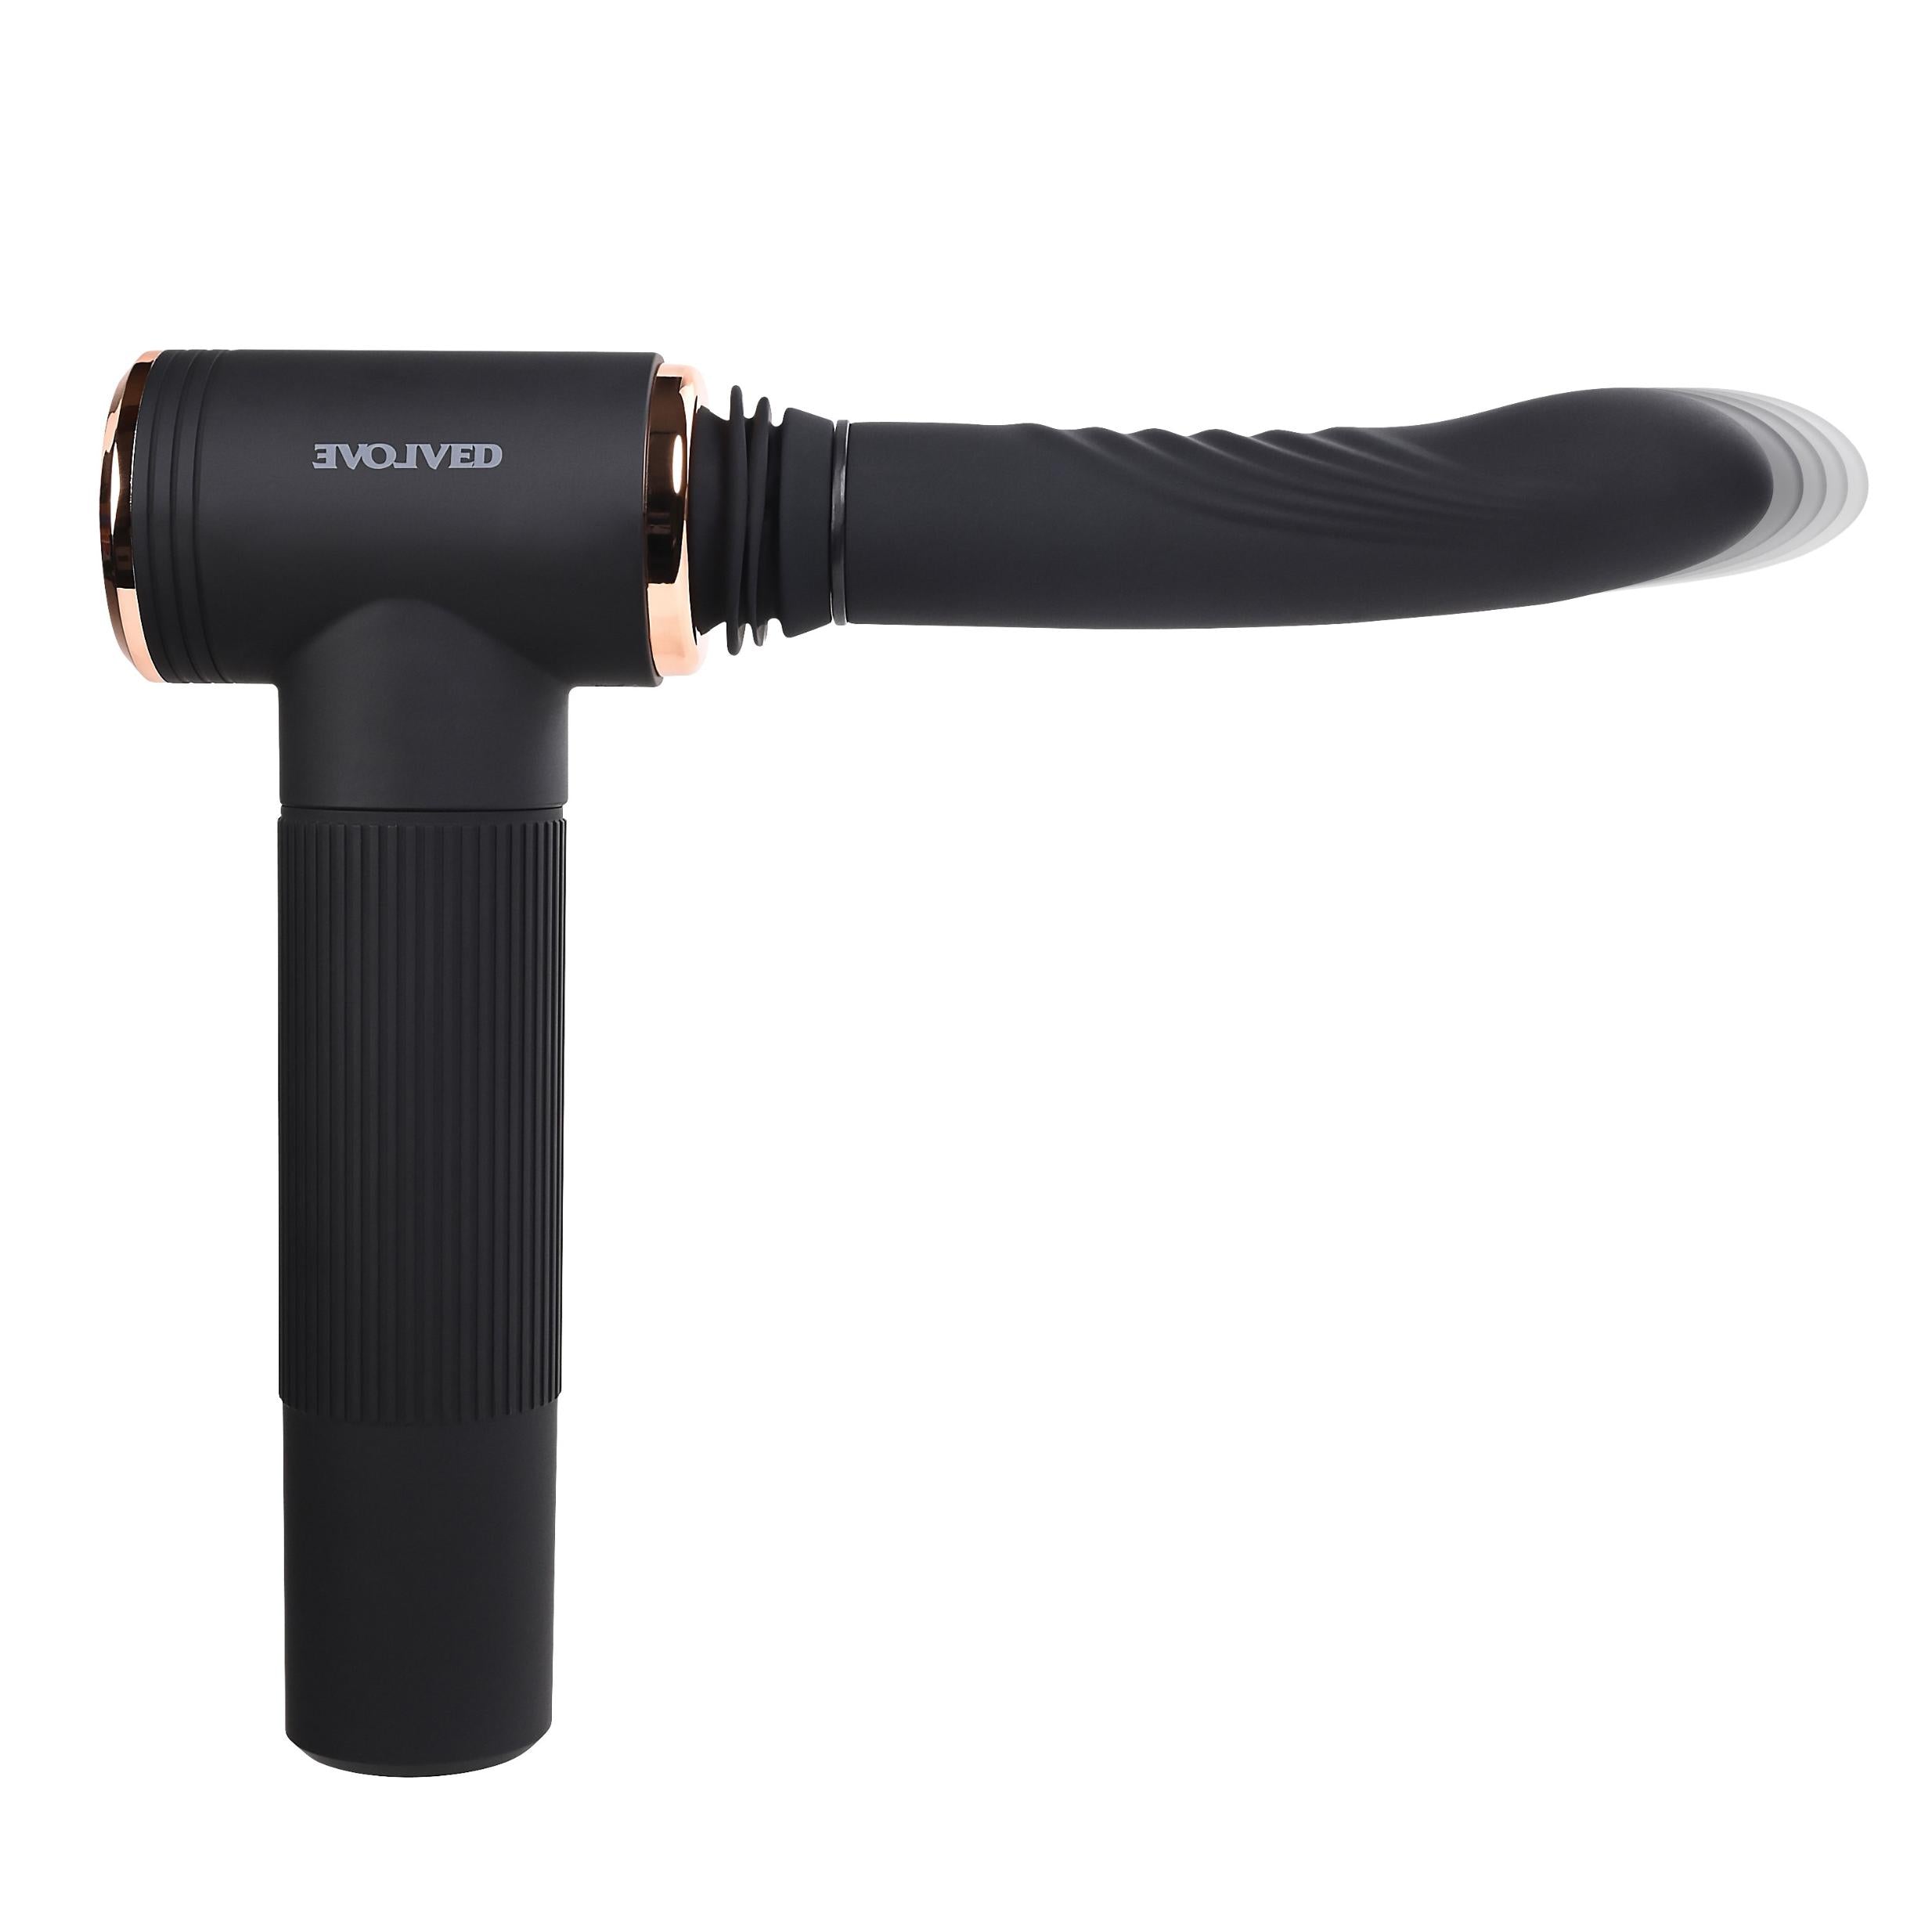 Too Hot to Handle Mountable Thrusting Personal Massager/Vibrator - Black